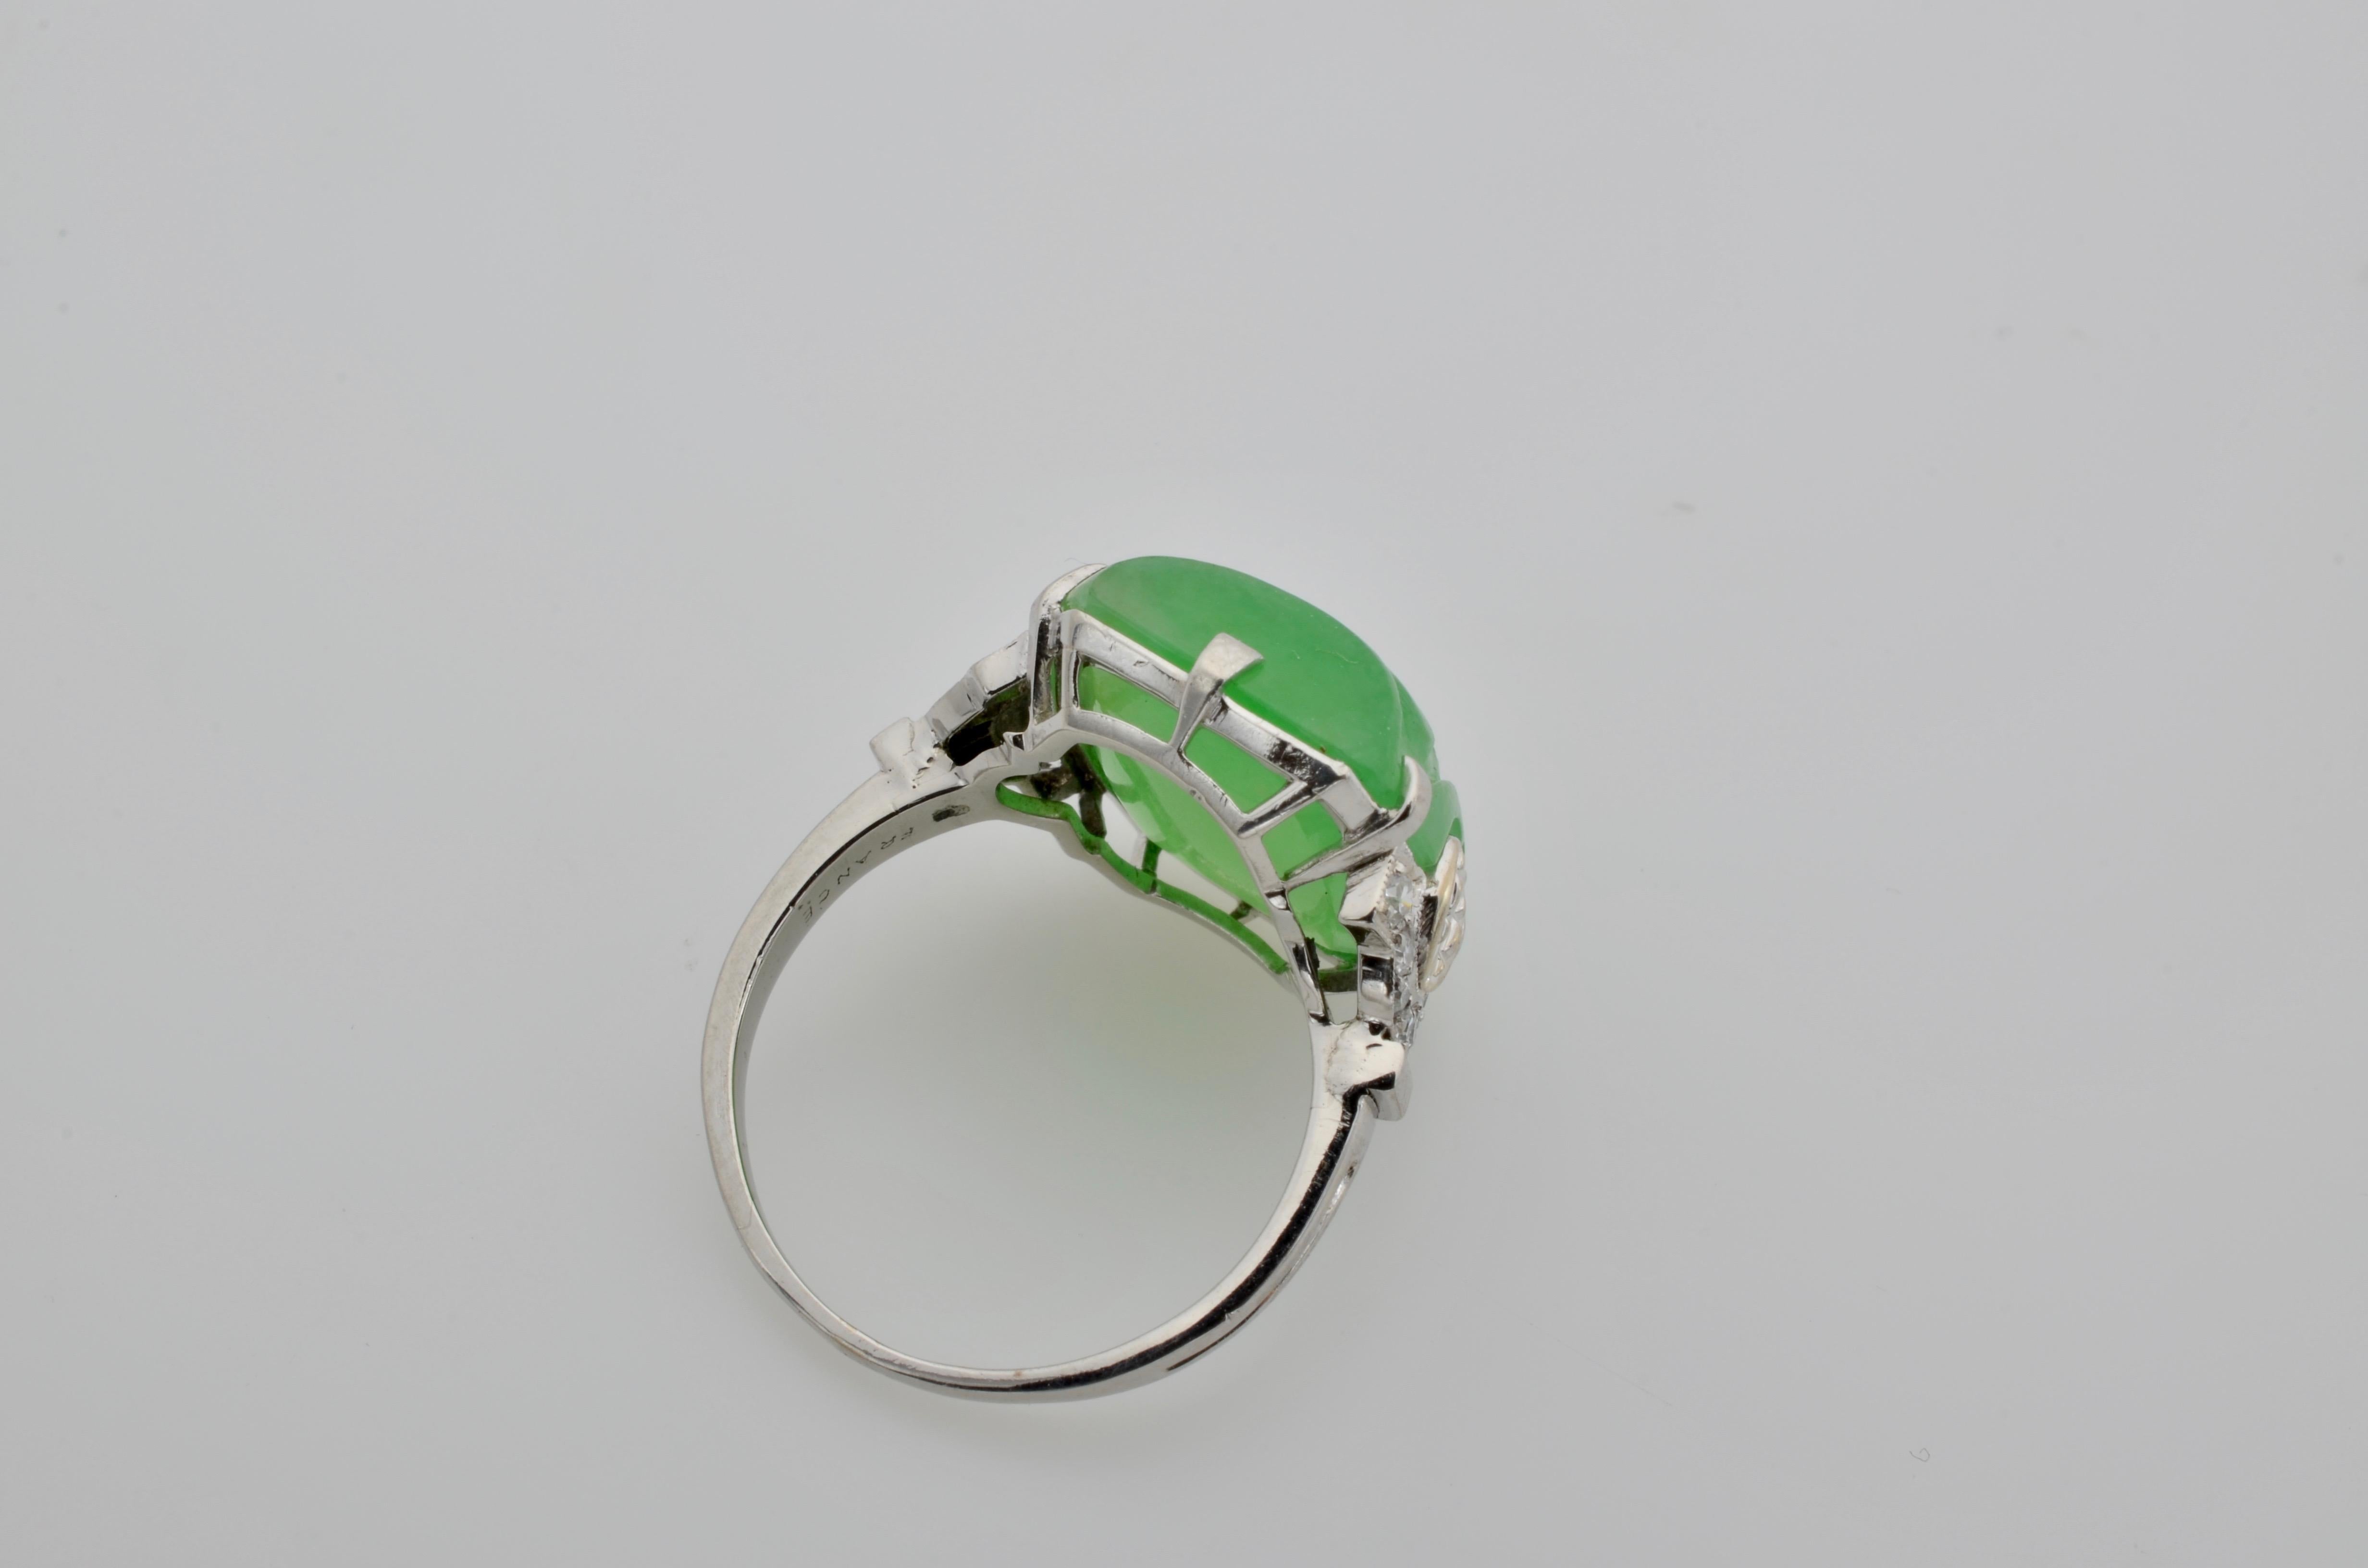 Engraved spirals sit perfectly in the center of this bright spring green Jadeite Jade ring. Made in France and set in Platinum this ring has 0.15 carats total weight of old mine cut diamonds embellished on the sides for exquisite detail. This is a